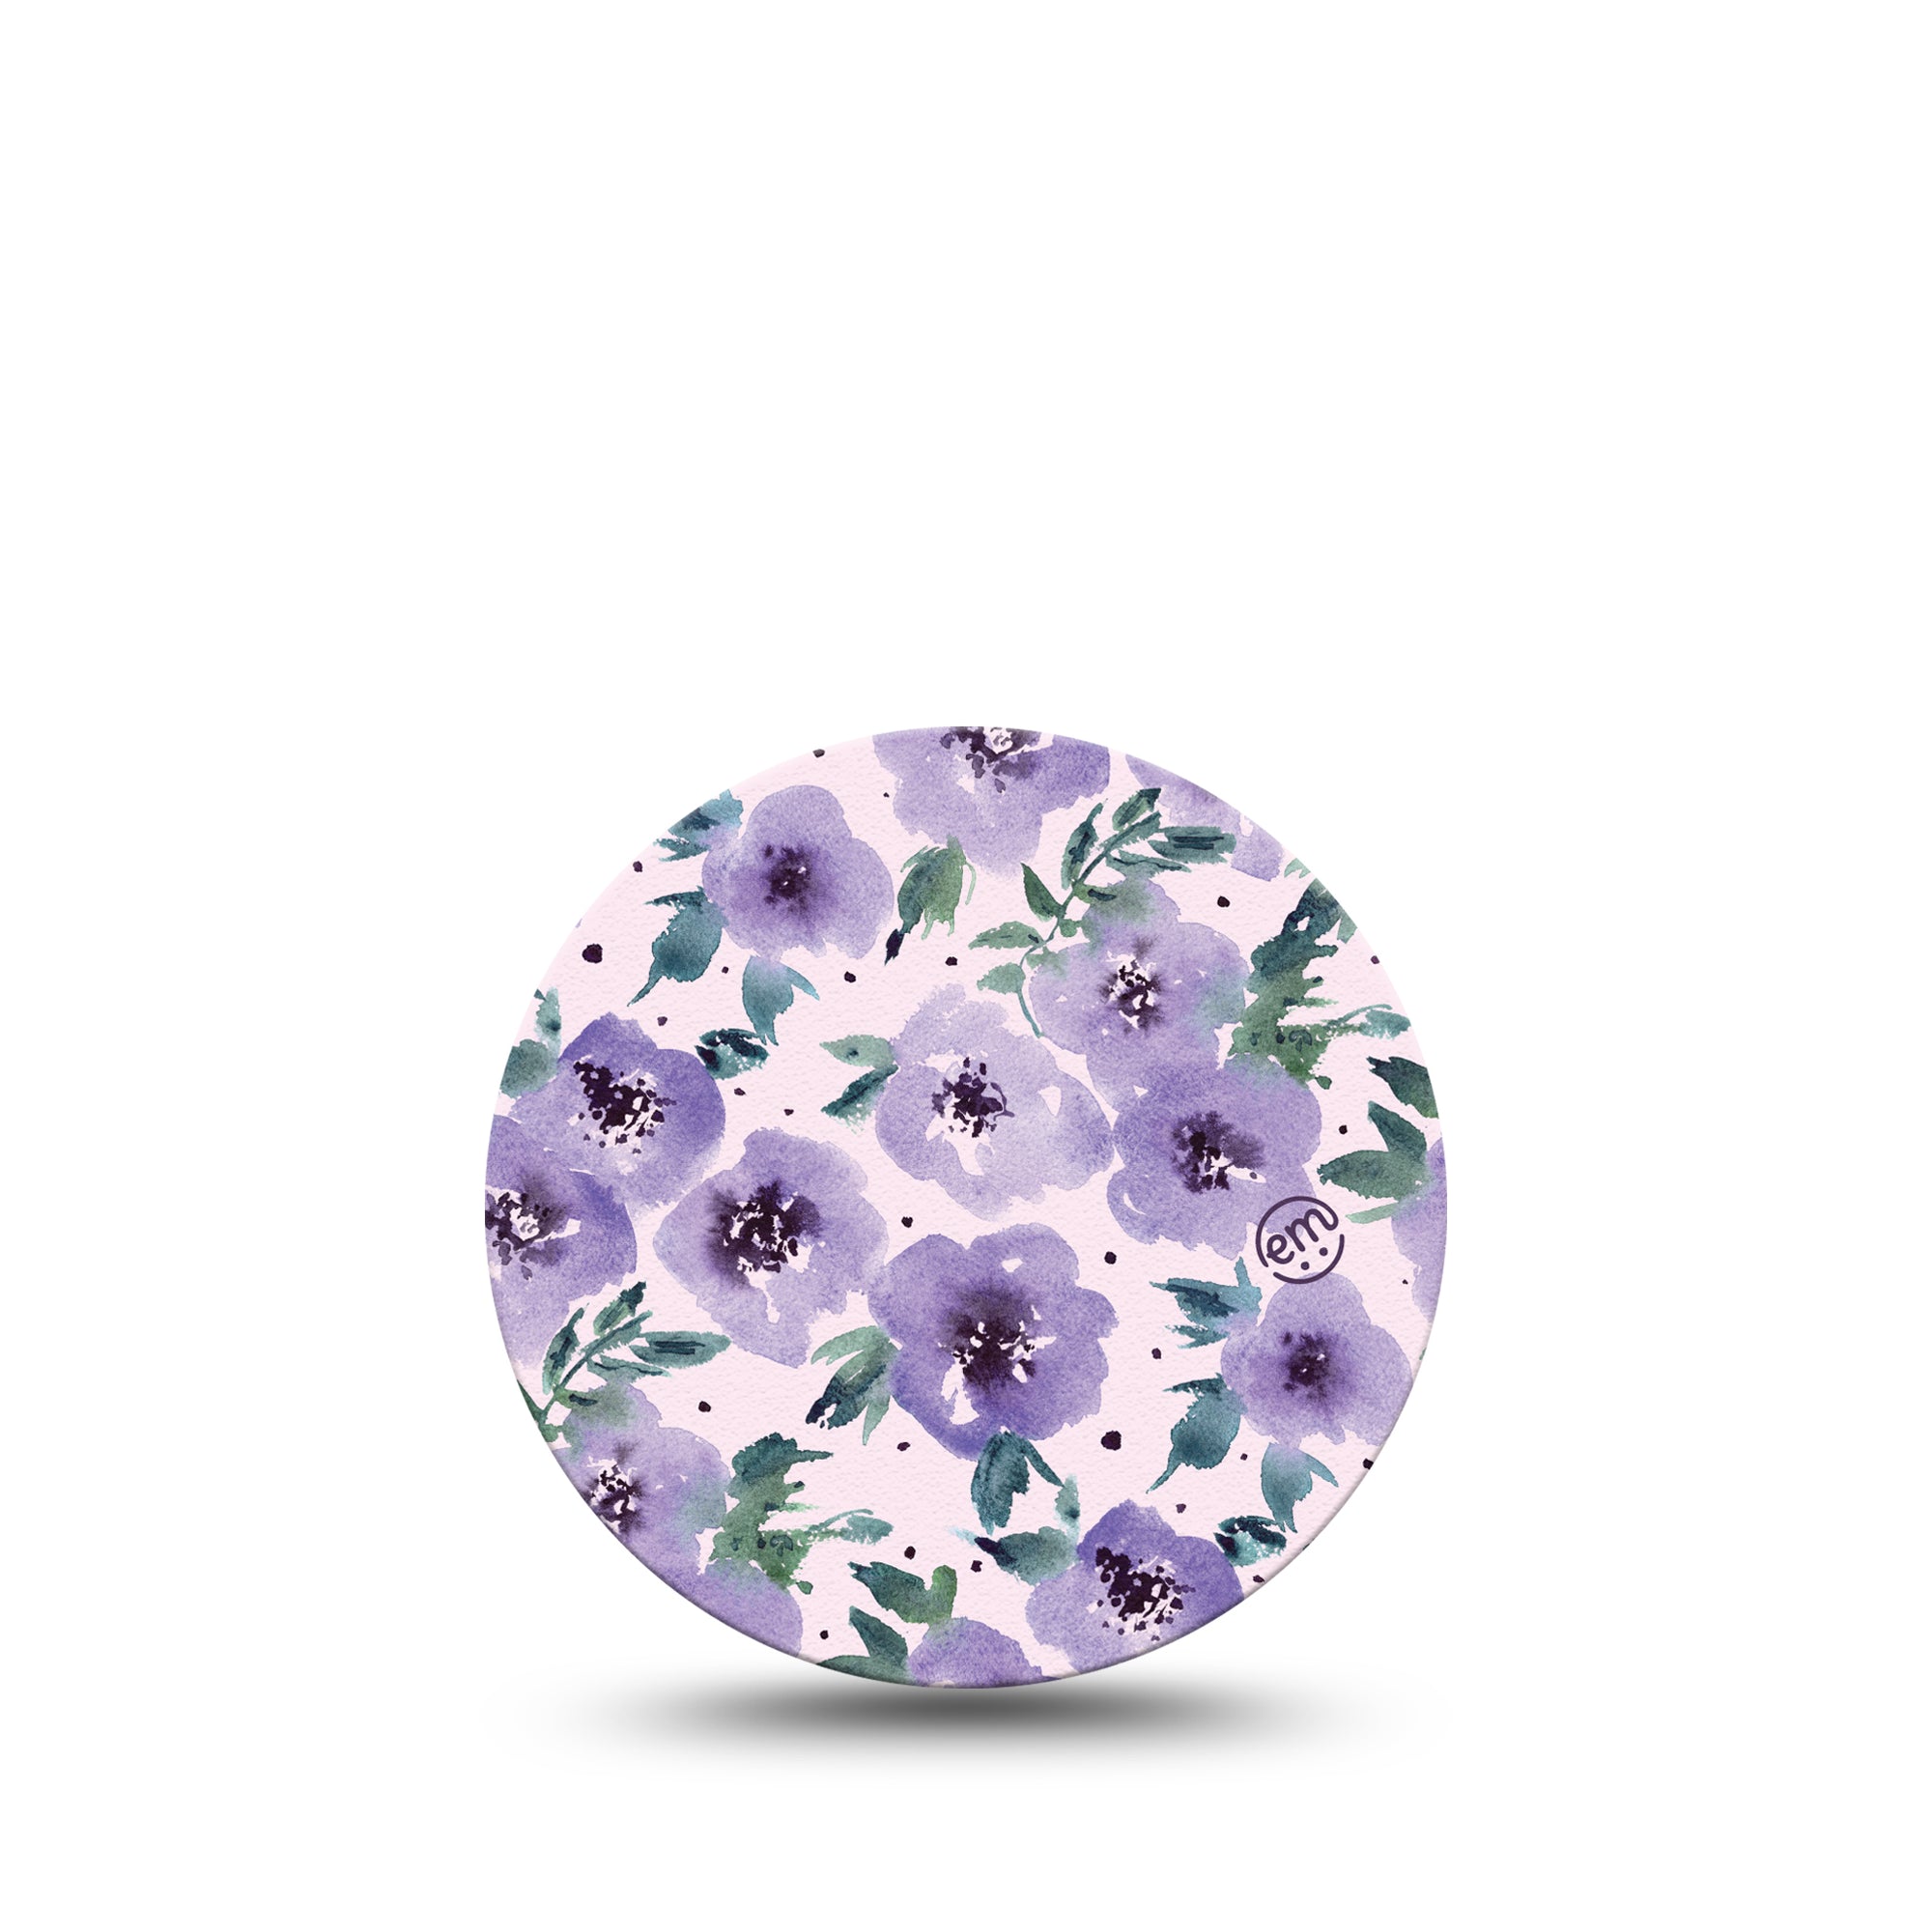 ExpressionMed Flowering Amethyst Libre 3 Overpatch, Single, Light Purple Flowers Inspired, CGM Adhesive Tape Design